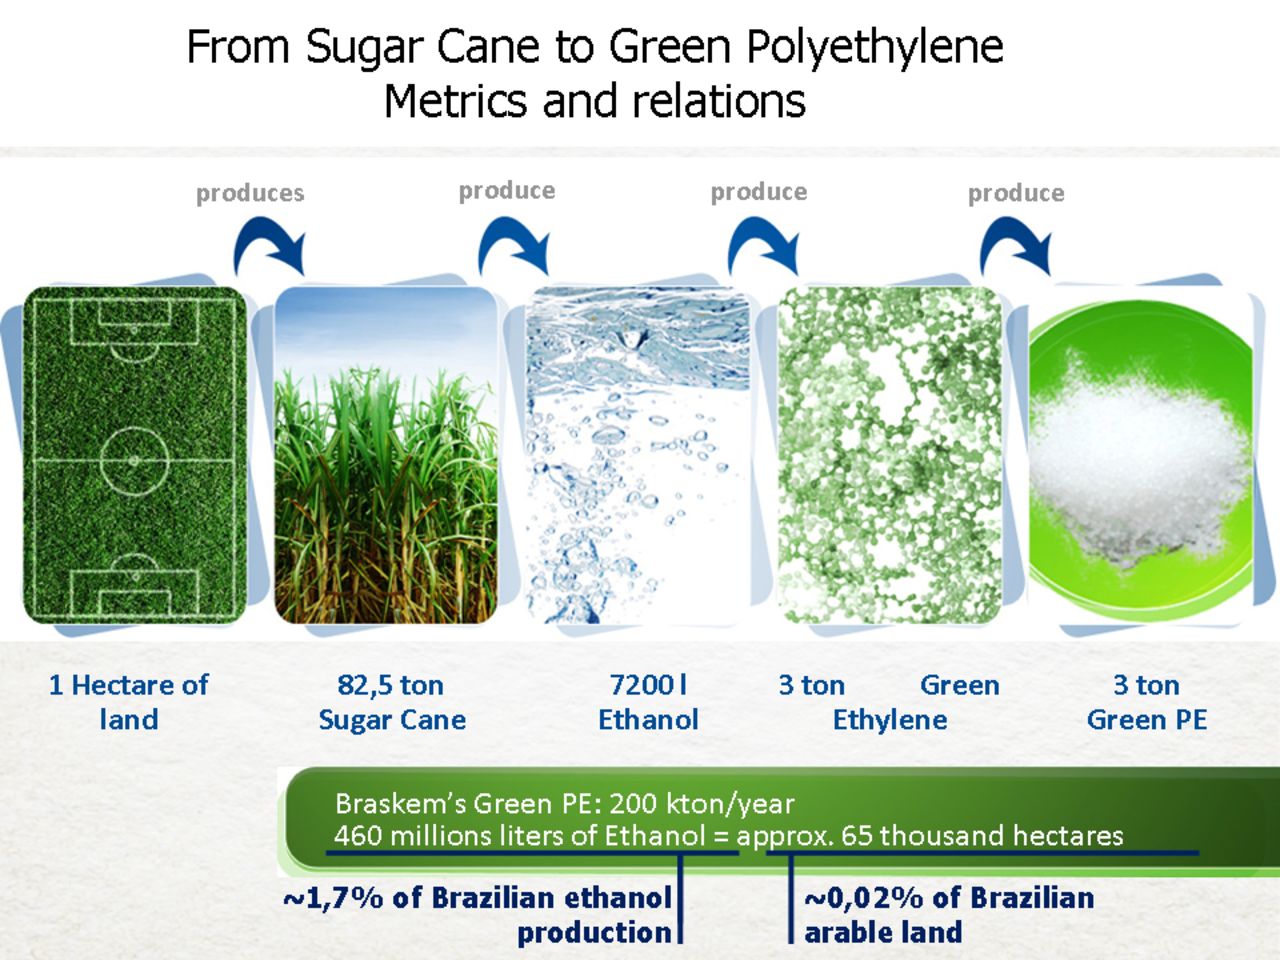 Brazilian chemical firm Braskem leads the way in the production of green plastics alternatives derived from sugarcane.